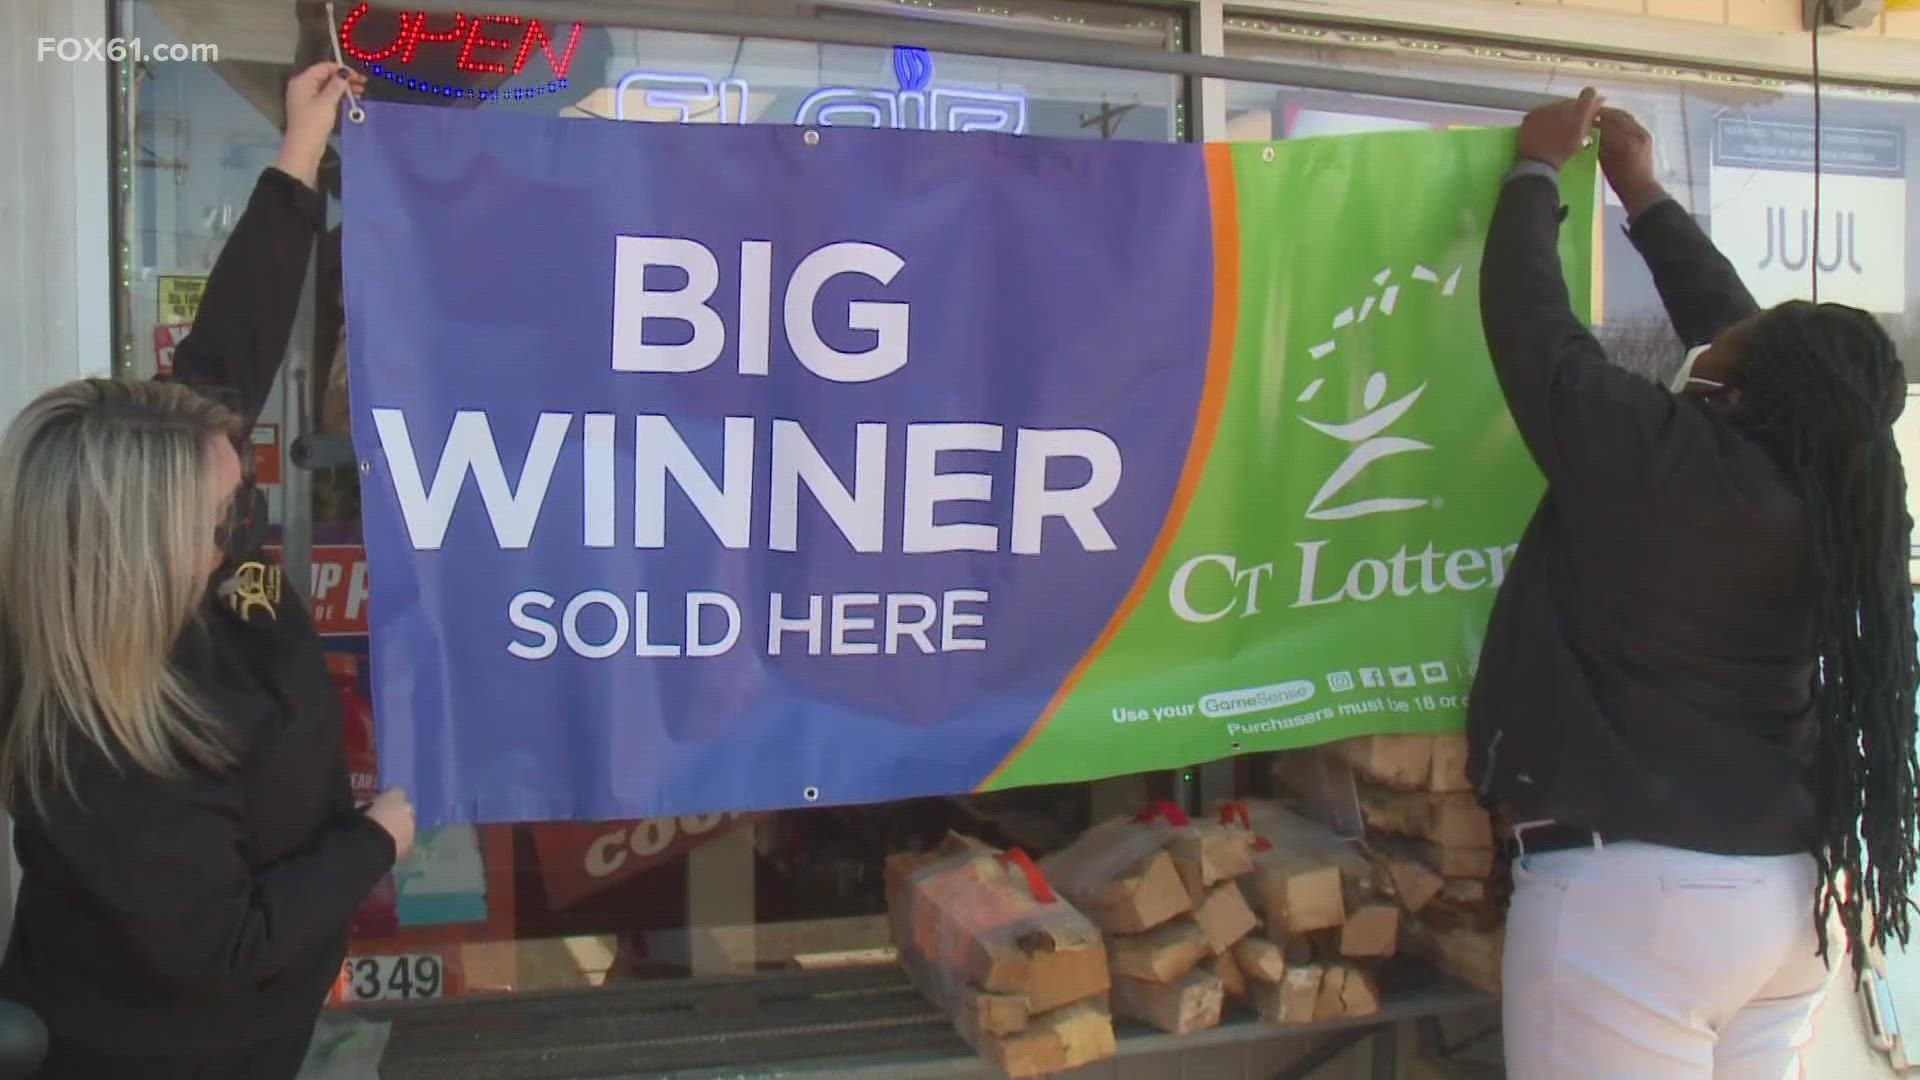 The winning ticket was sold at a convenience store in Cheshire, officials said.